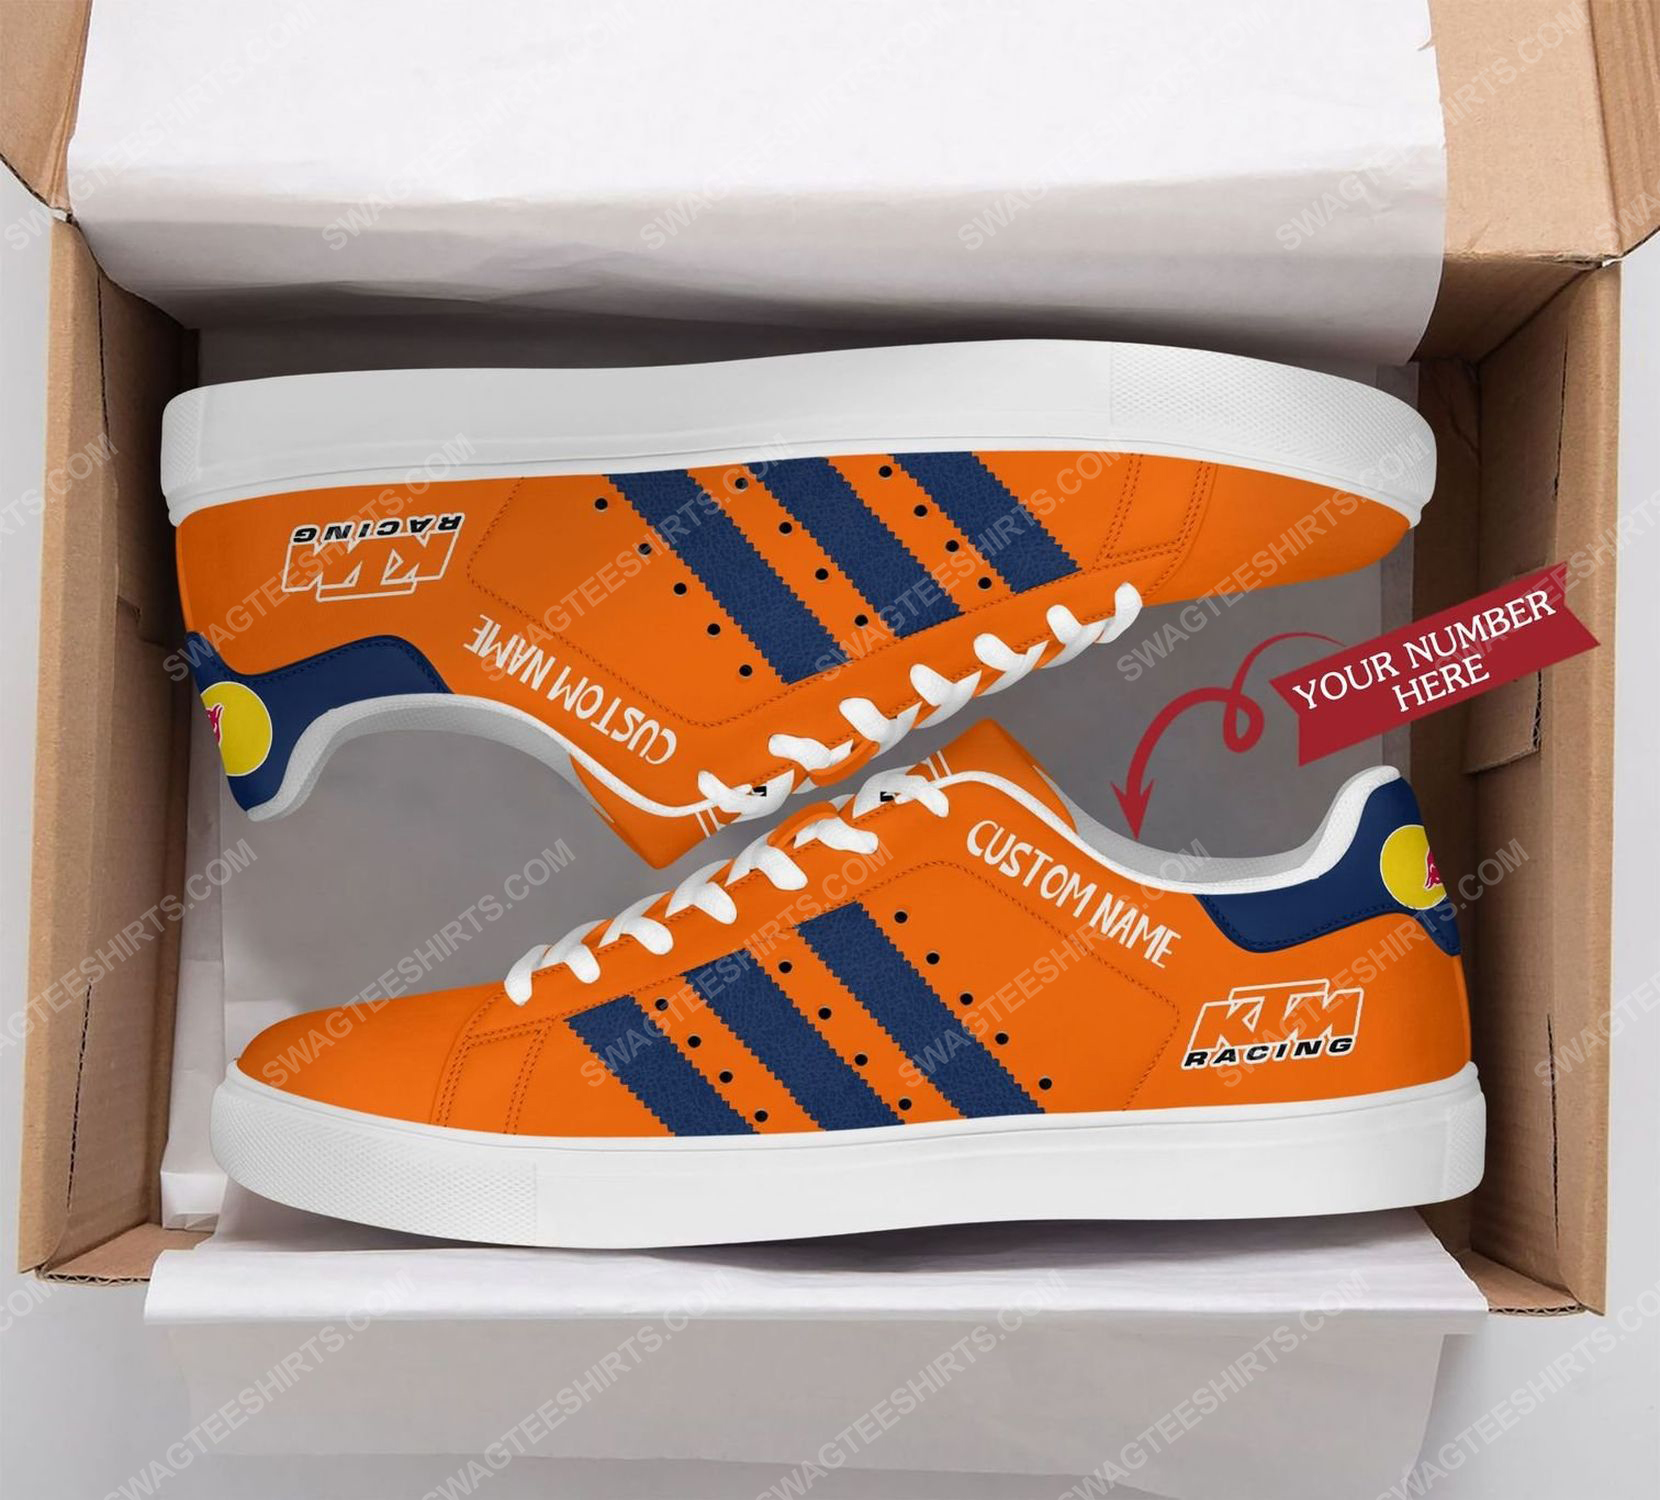 [special edition] Custom red bull ktm factory racing’s cooper stan smith shoes – Maria